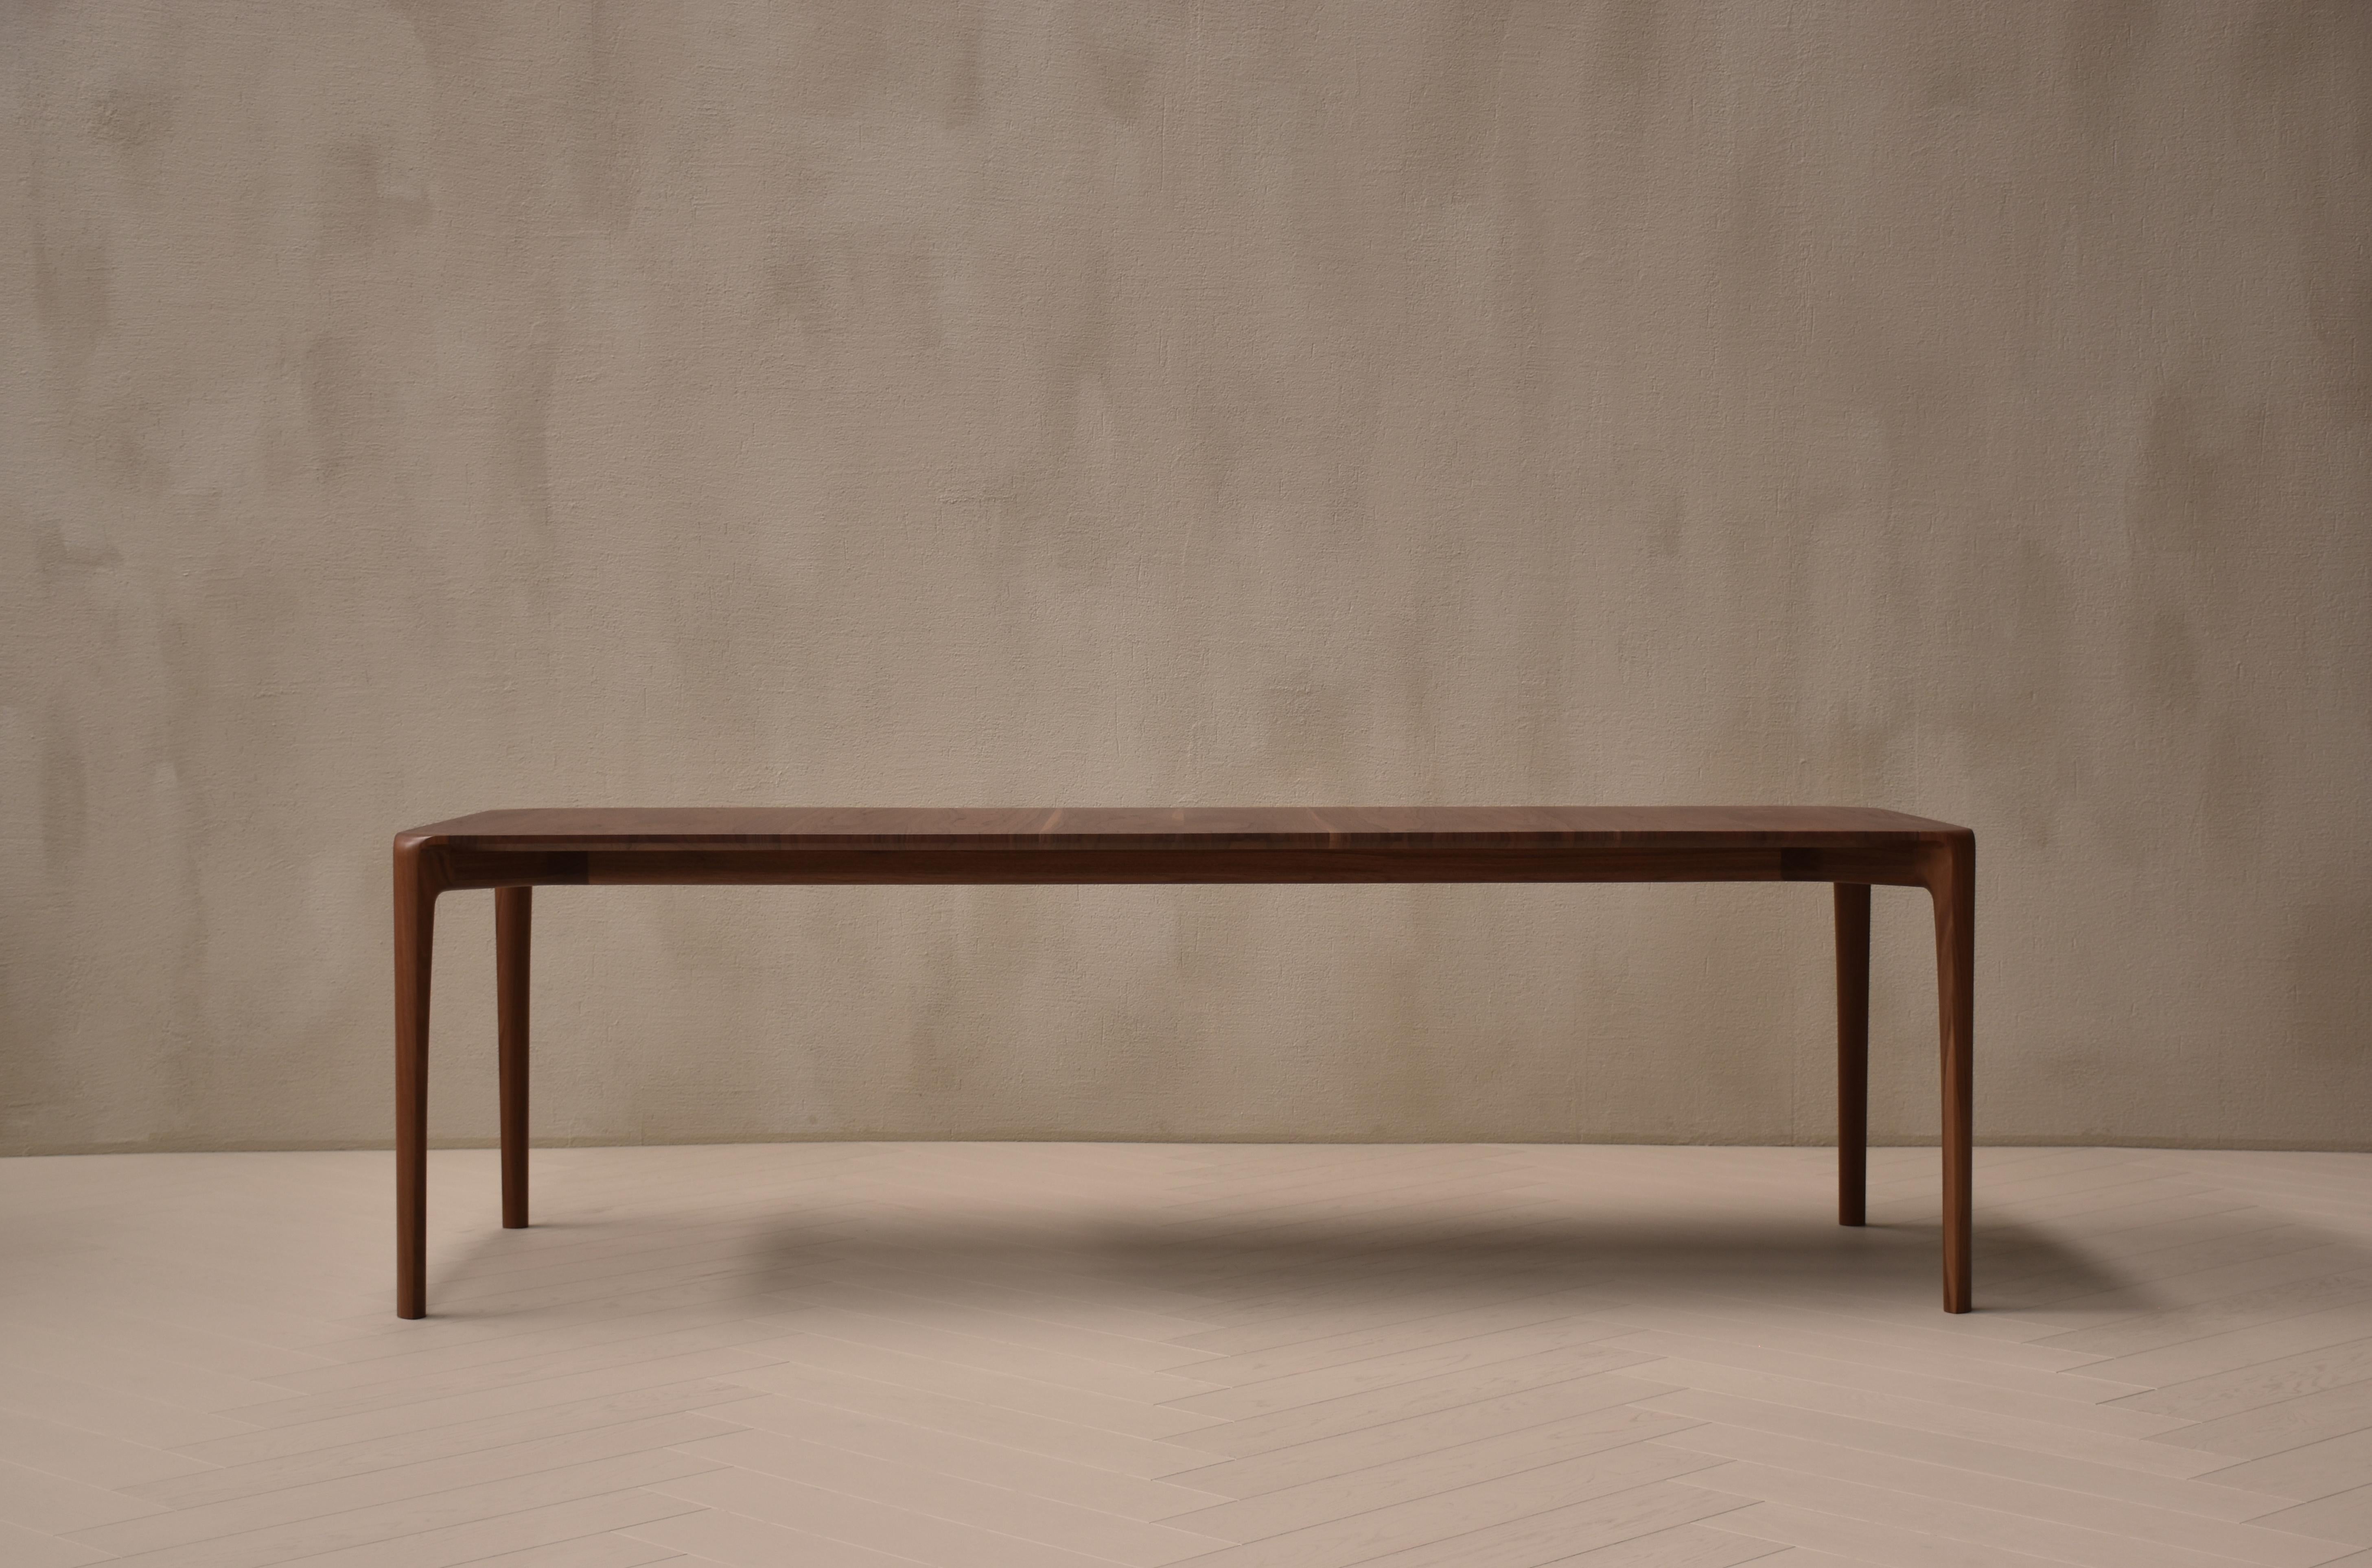 Kingston Dining Table by Daniel Poole
Dimensions: D 90 x W 240 x H 74 cm. 
Materials: American Back Walnut with 10% gloss lacquer.

This table includes a certificate of authenticity. Please contact us. 

Daniel Poole PL is a bespoke furniture design